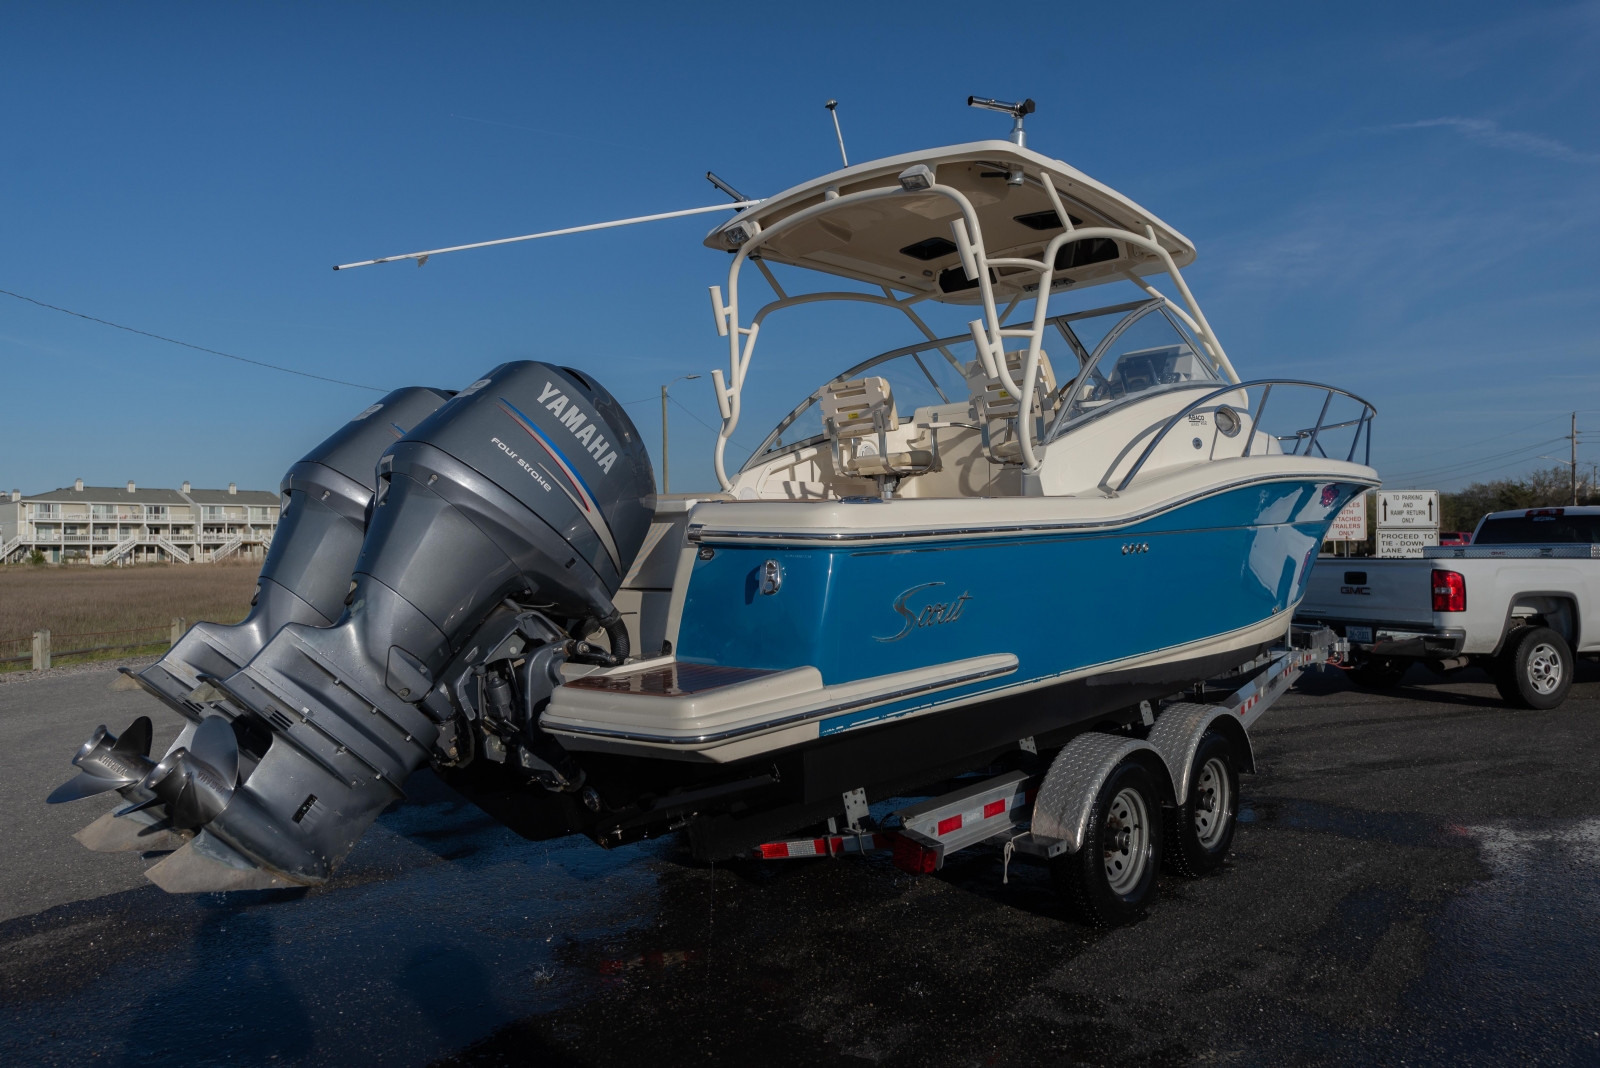 Used Boat Sales are on the Rise!